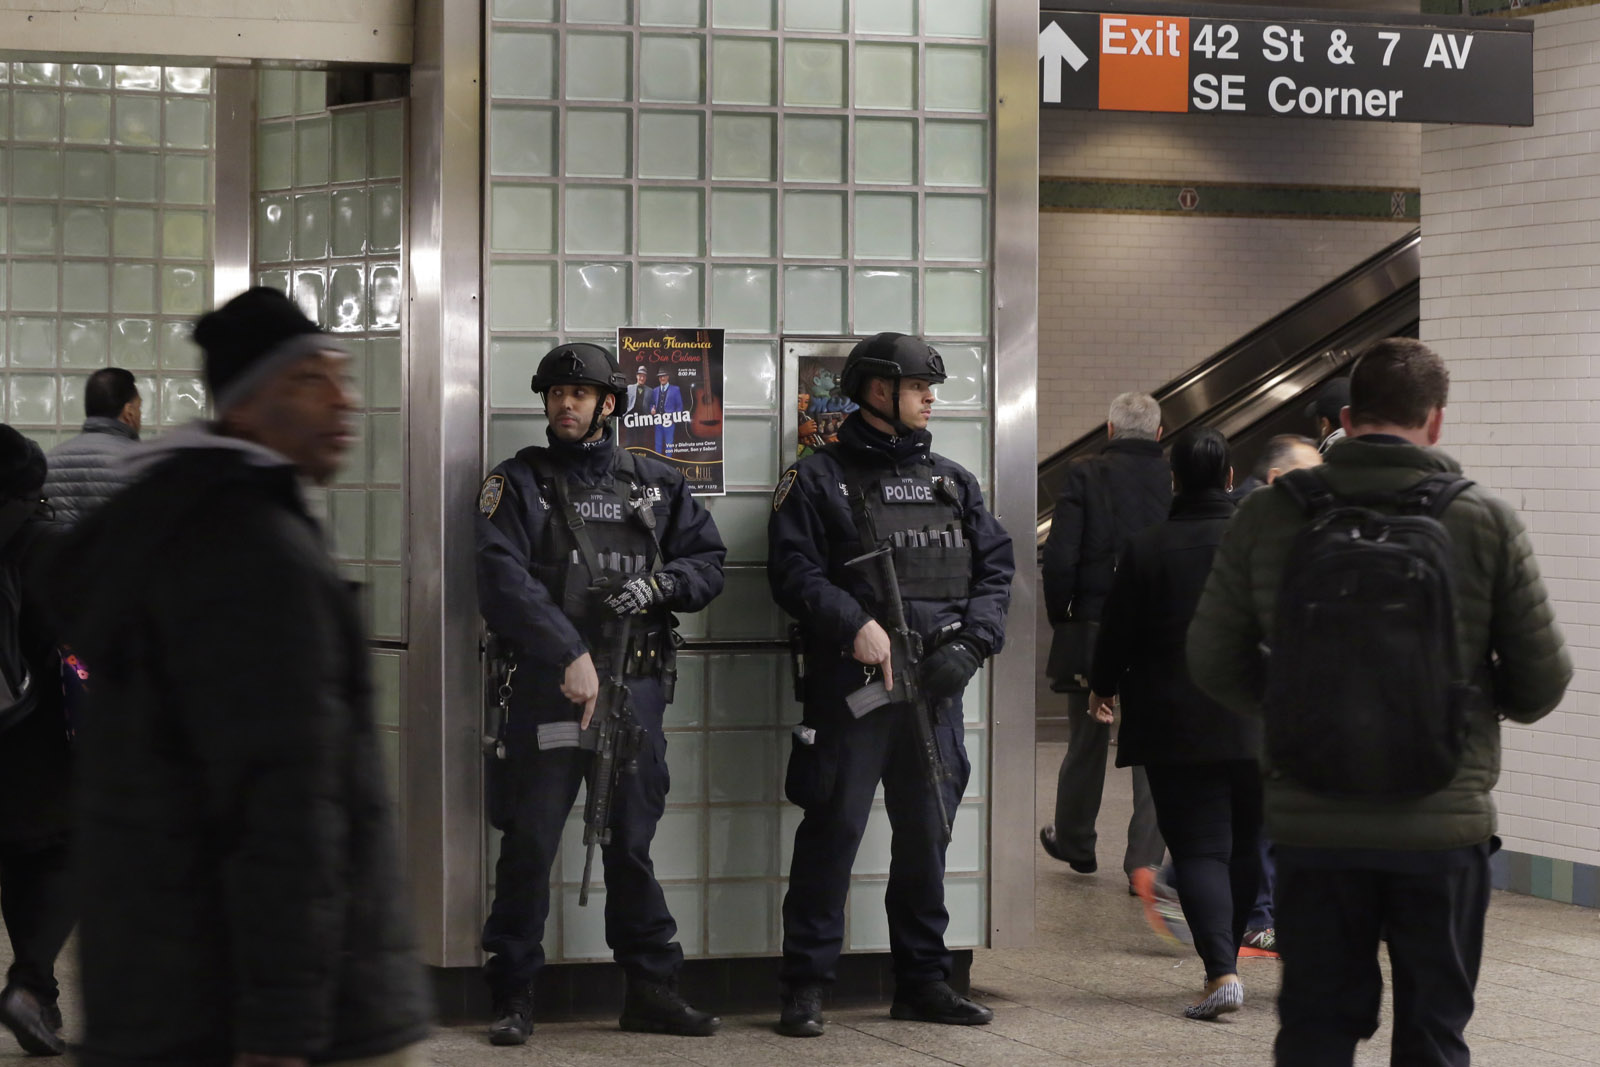 A pair of New York City Police Transit officers patrol in New York the subway station in Times Square,  Tuesday, March 22, 2016. Authorities are increasing security throughout New York City following explosions at the airport and subway system in the Belgian capital of Brussels.  (AP Photo/Richard Drew)